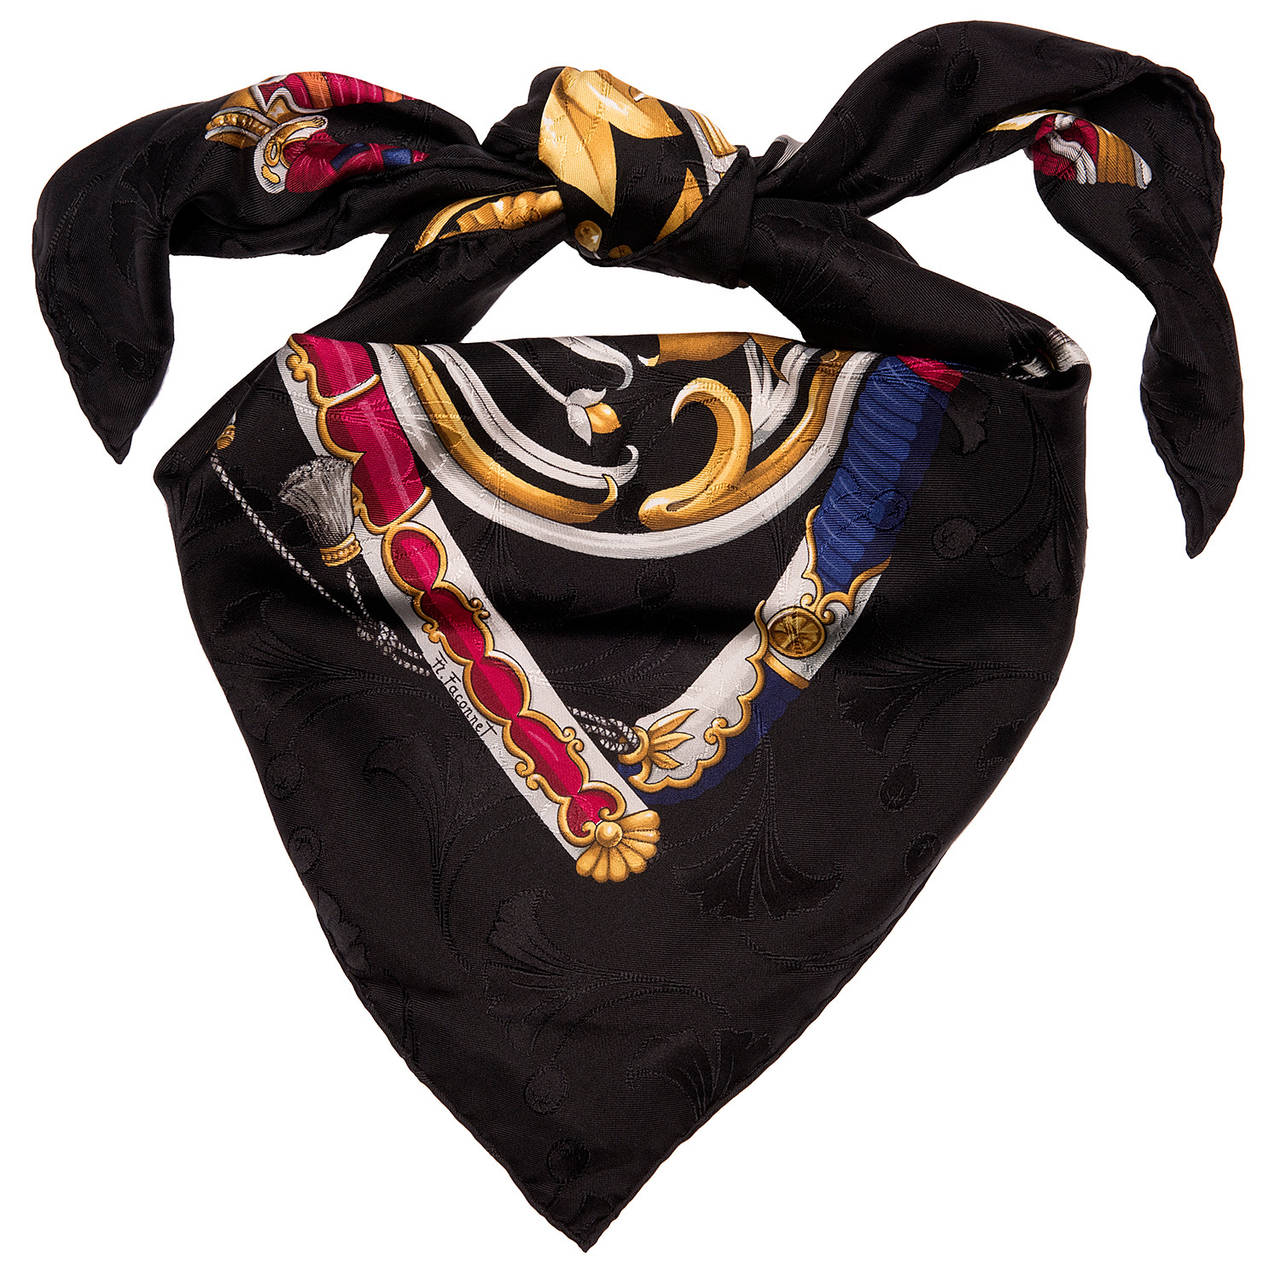 Real luxury with this Silk 'Damask' Scarf by Hermes. Fantastic design and deep, rich colours mark this as a very special example. The full title of the scarf is 'Daymo Princes du Soleil Levant' and it was designed by one of Hermes favourite